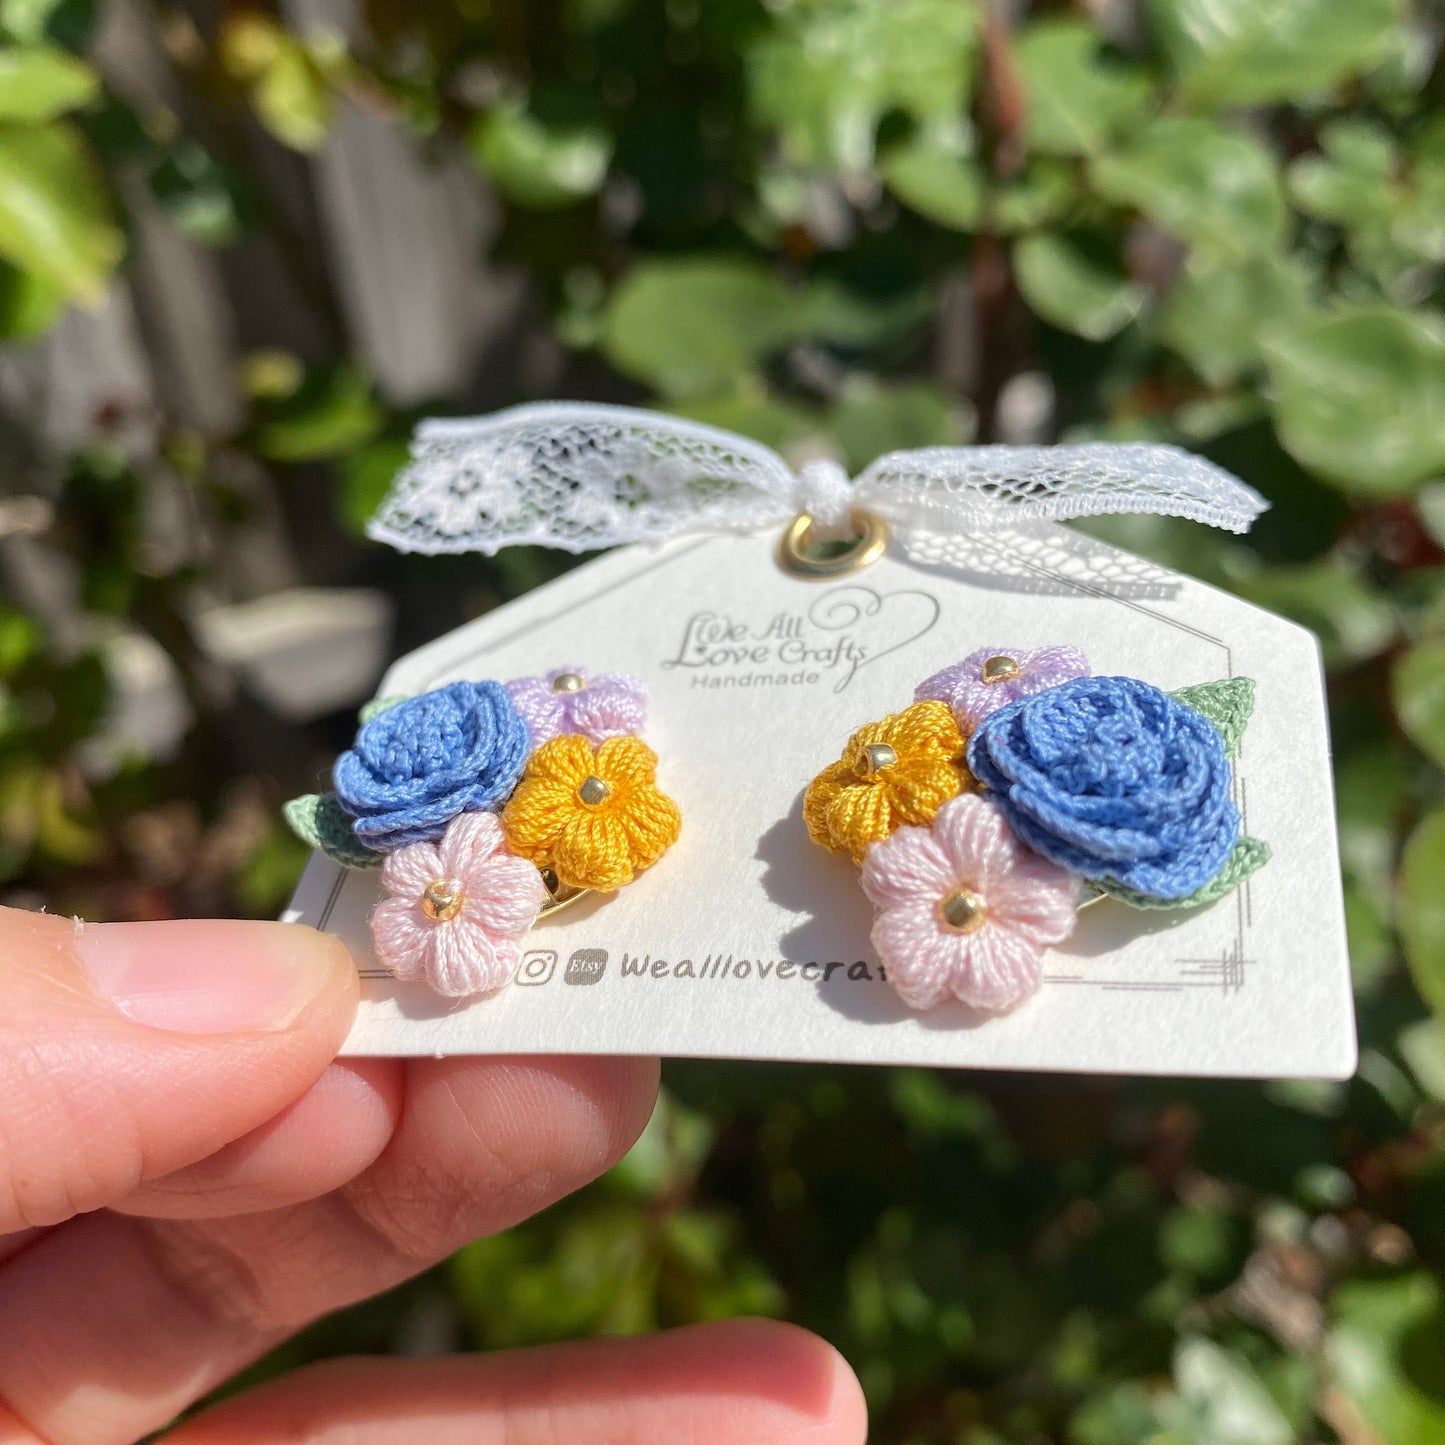 Blue Floral bouquet bundle Studs/Microcrochet/14k gold earrings/Spring gift for her/Knitting handmade jewelry/Retro vintage/Ship from US